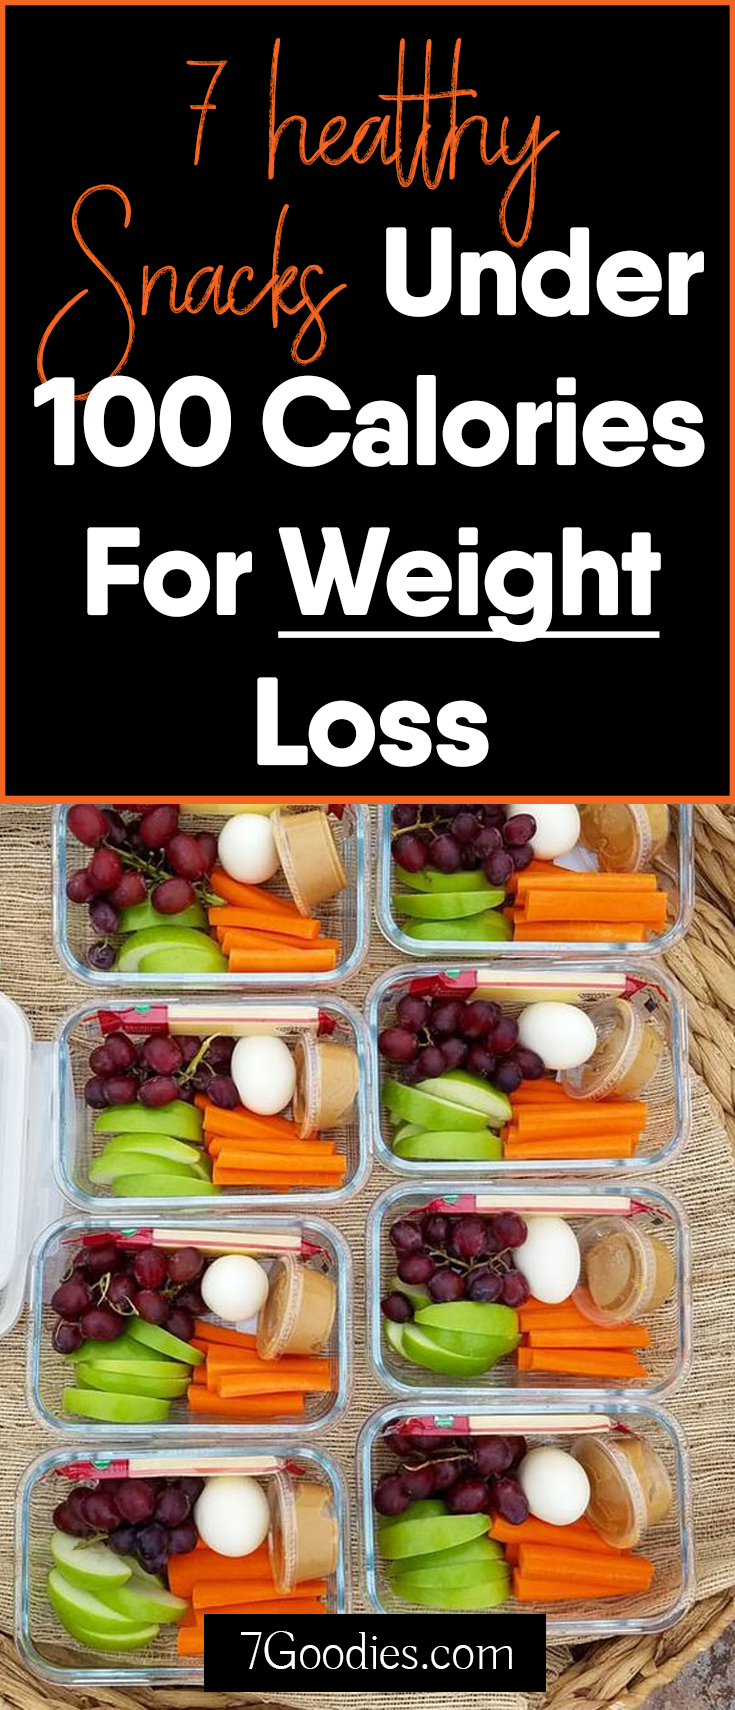 10 Wonderful Snack Ideas For Weight Loss 7 healthy snacks under 100 calories for weight loss 2024